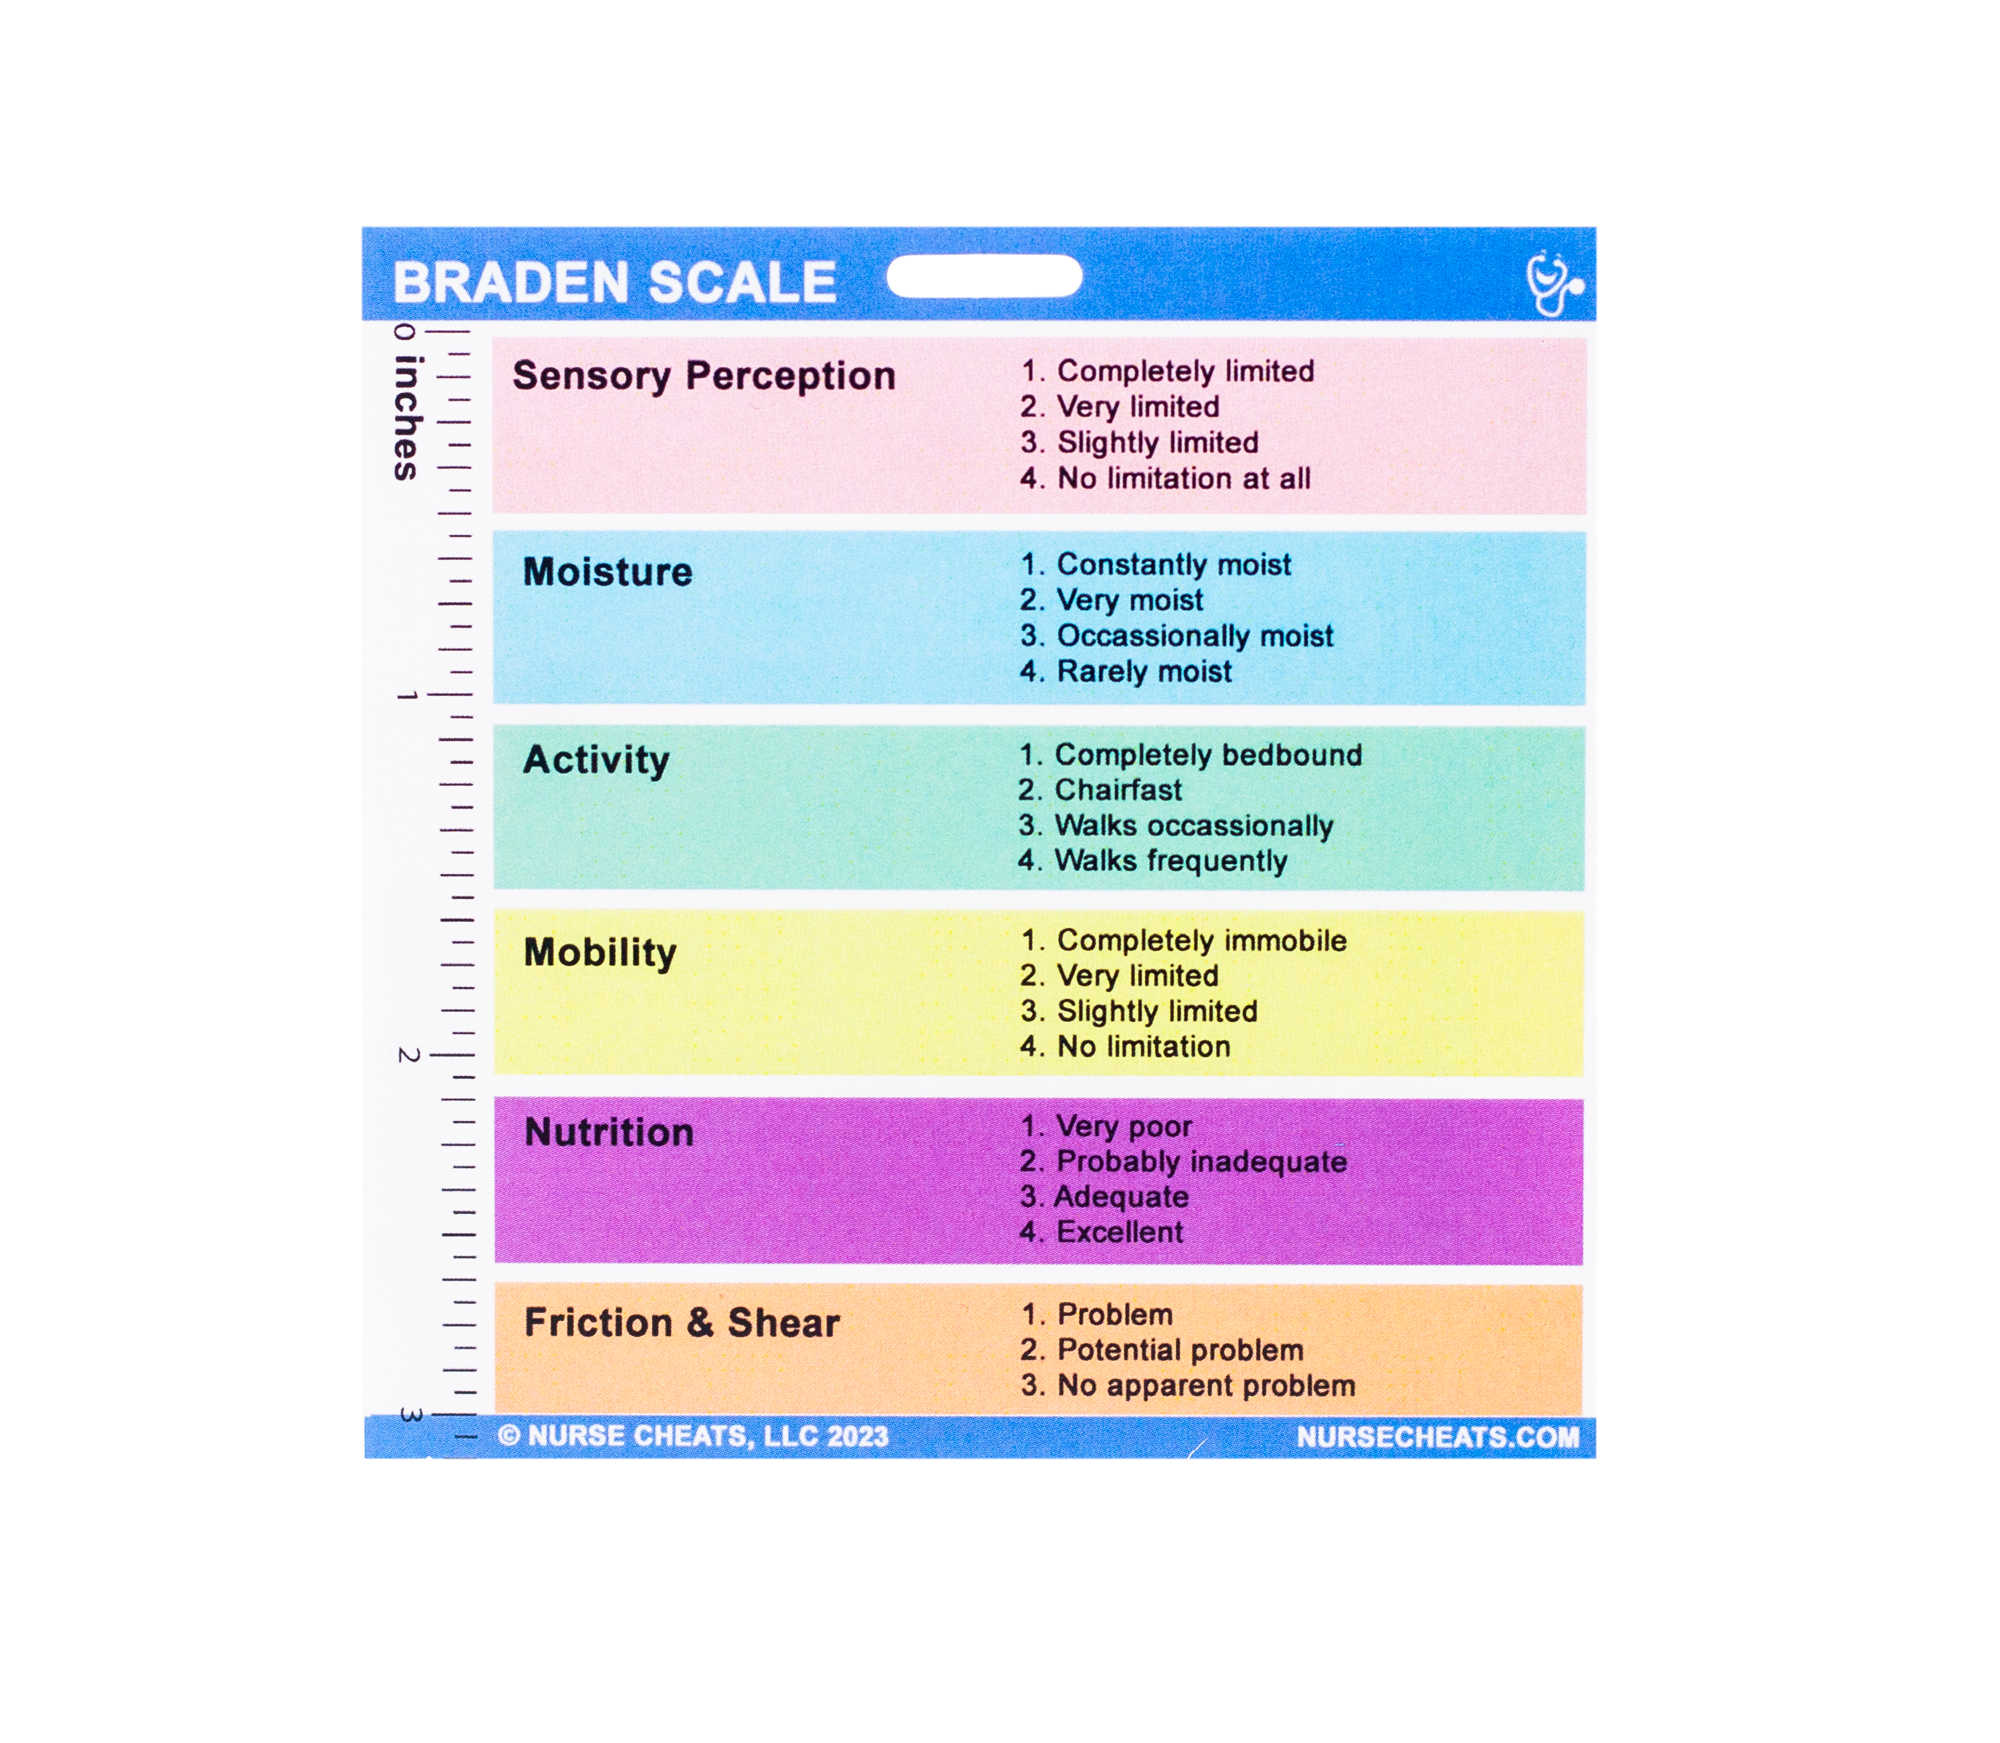 Side one of our Wound Care badge buddy contains the Braden scale which is useful in measuring risk for pressure wounds. 